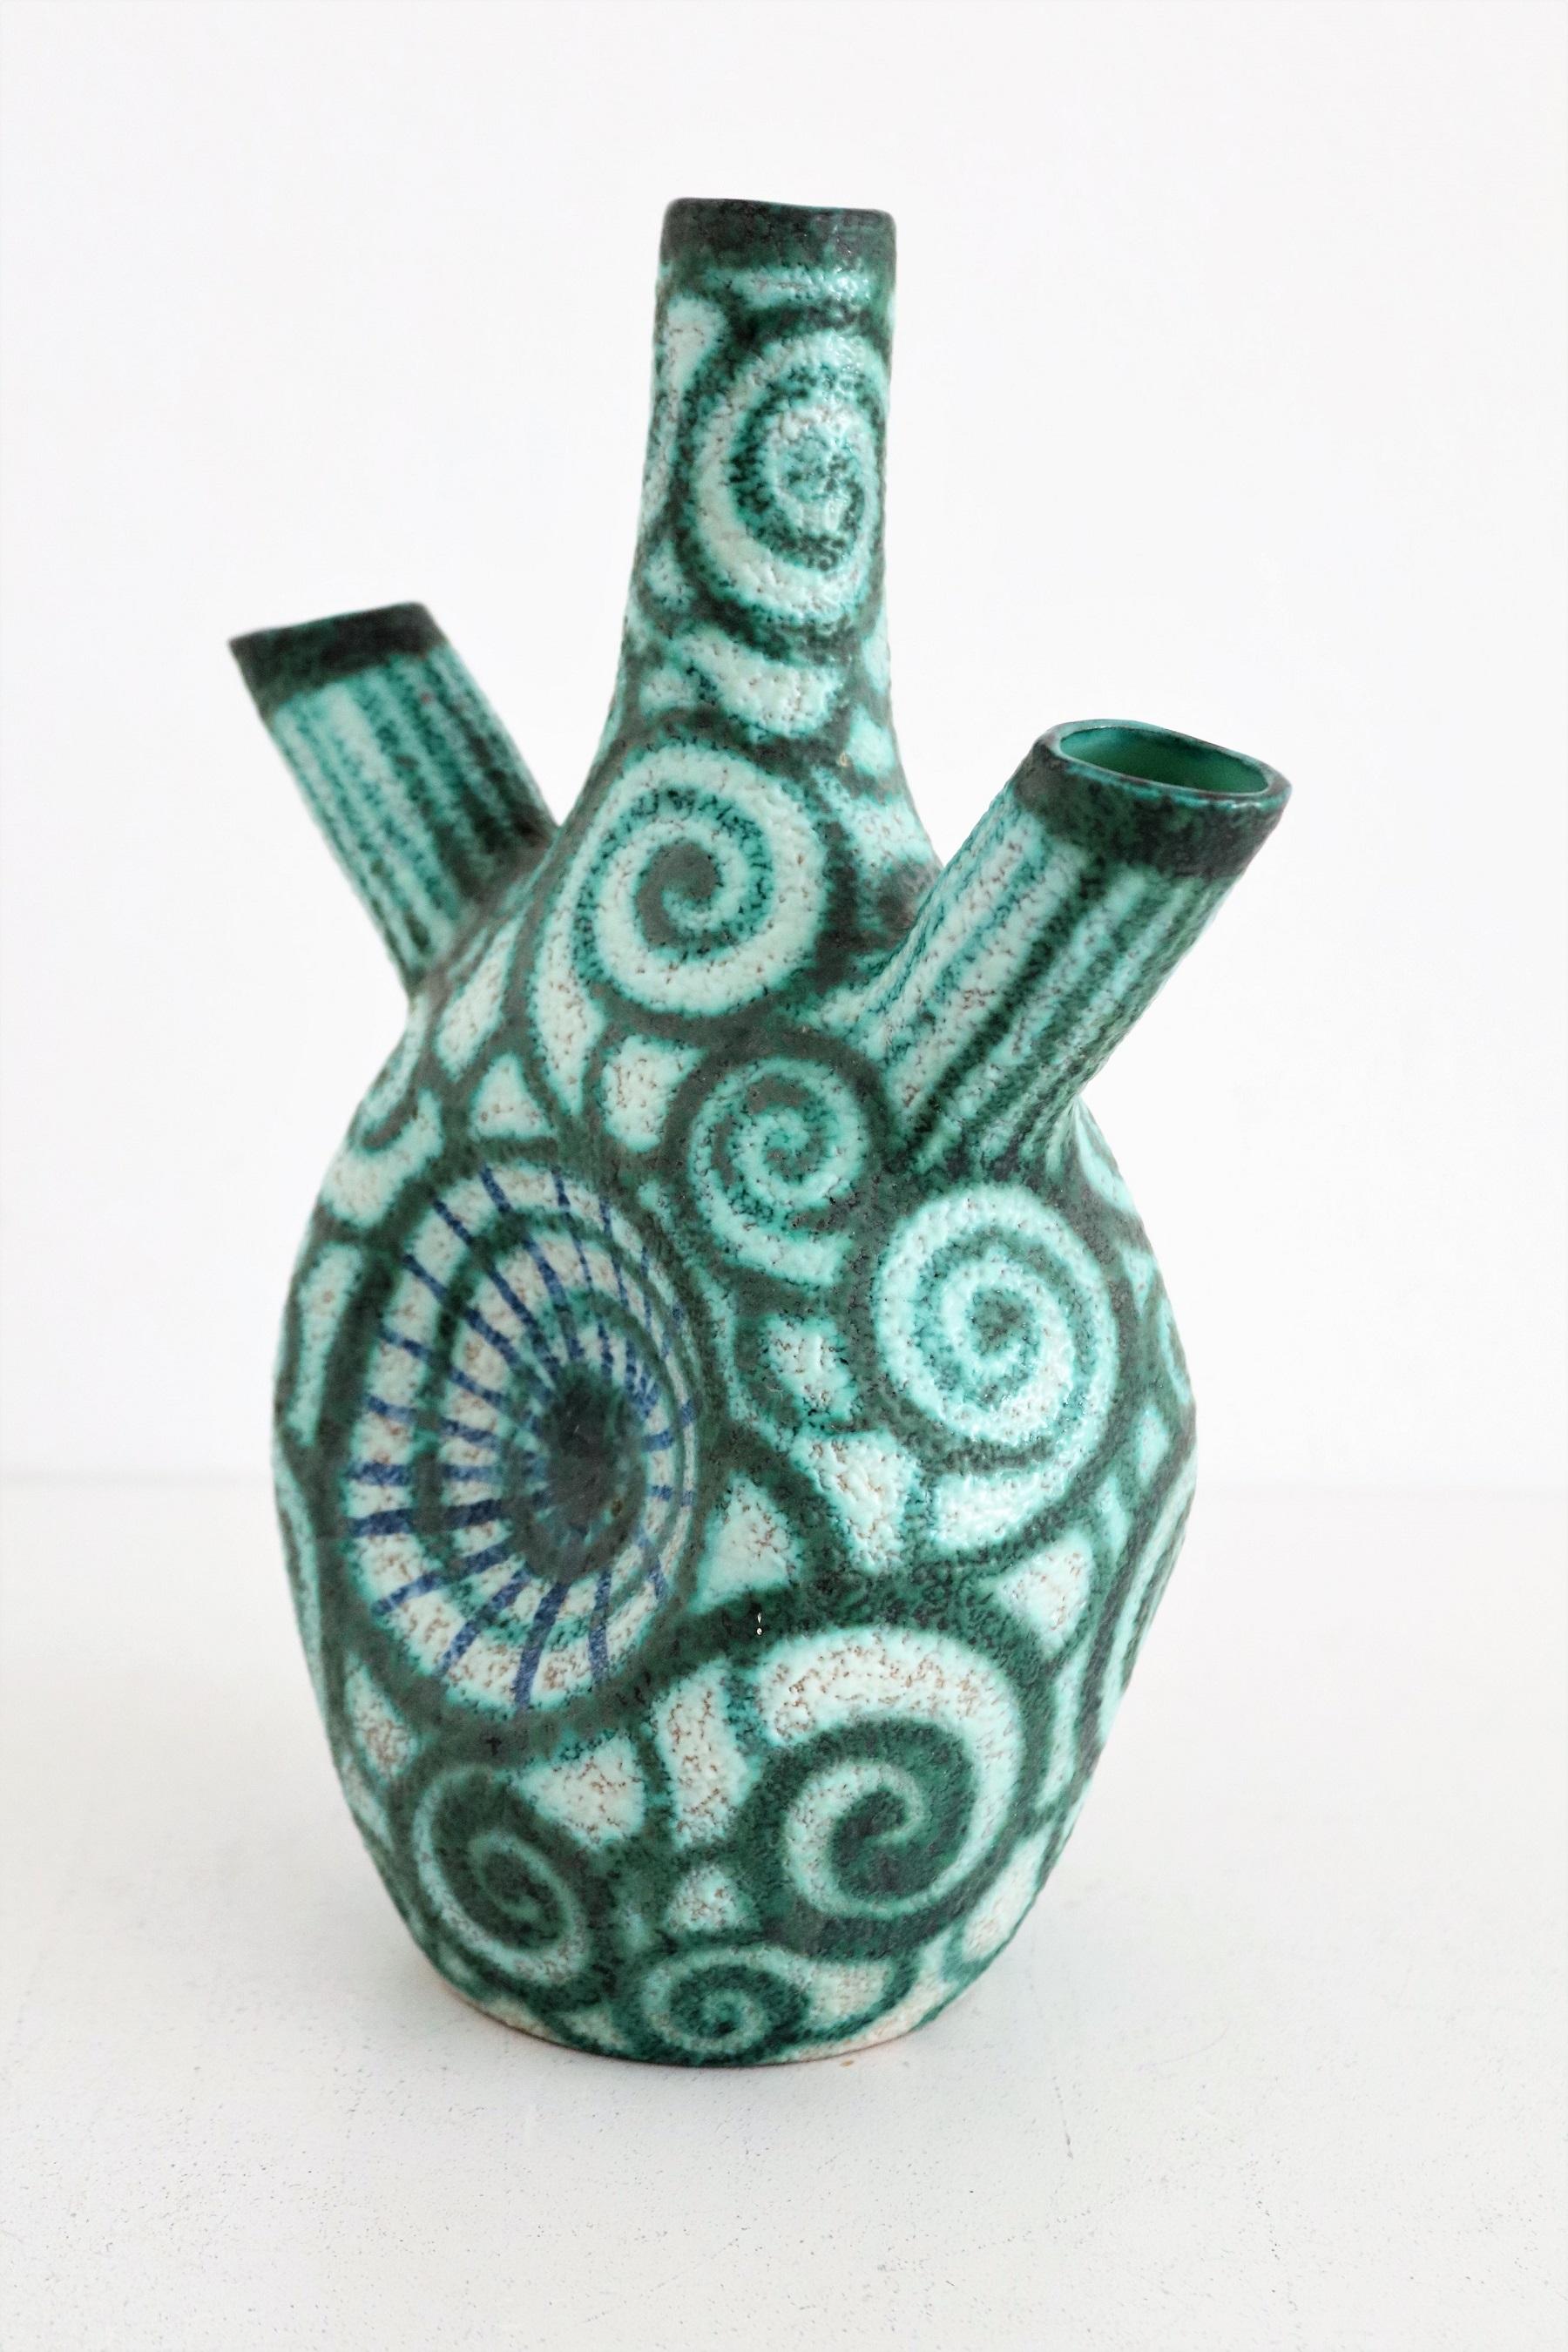 Gorgeous and rare polychrome pottery vase in bizzarre shape.
Made in the pottery manufactury from Giuseppe Barile in Albisola, Italy.
The vase is hand-crafted and hand-painted in beautiful bright colors.
The manufactury was founded in 1950, and